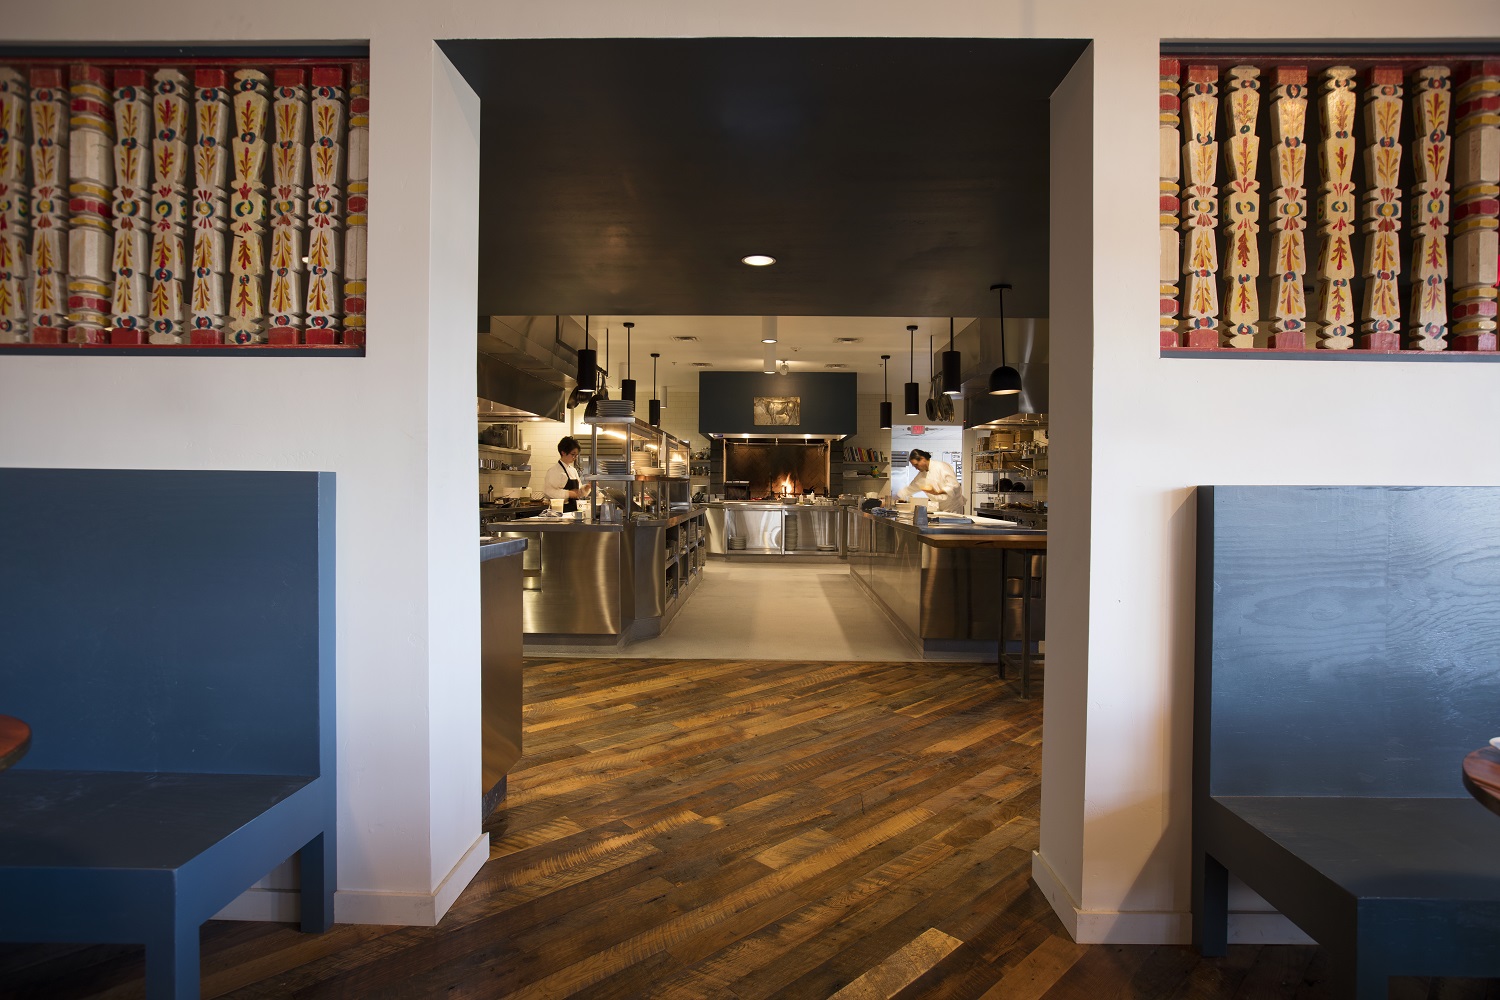 Campo, Los Poblanos’s new field-to-fork restaurant, is located in the restored milking barn.